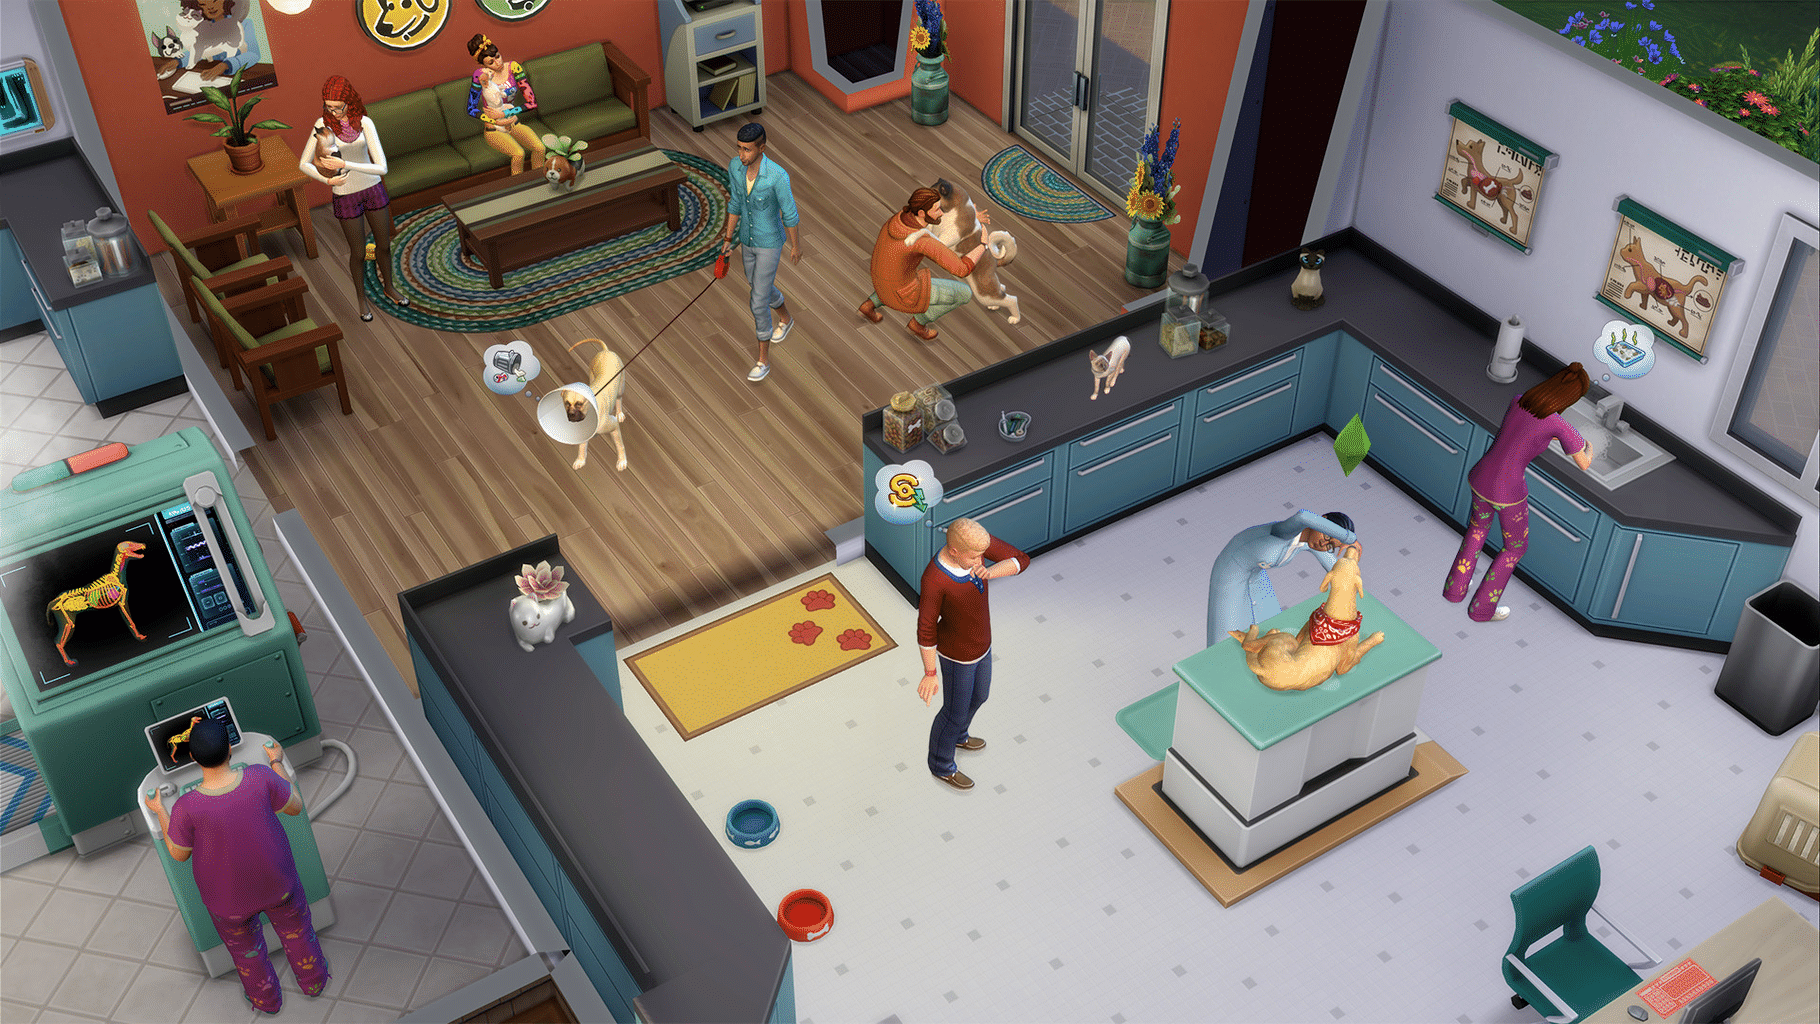 The Sims 4: Cats & Dogs screenshot